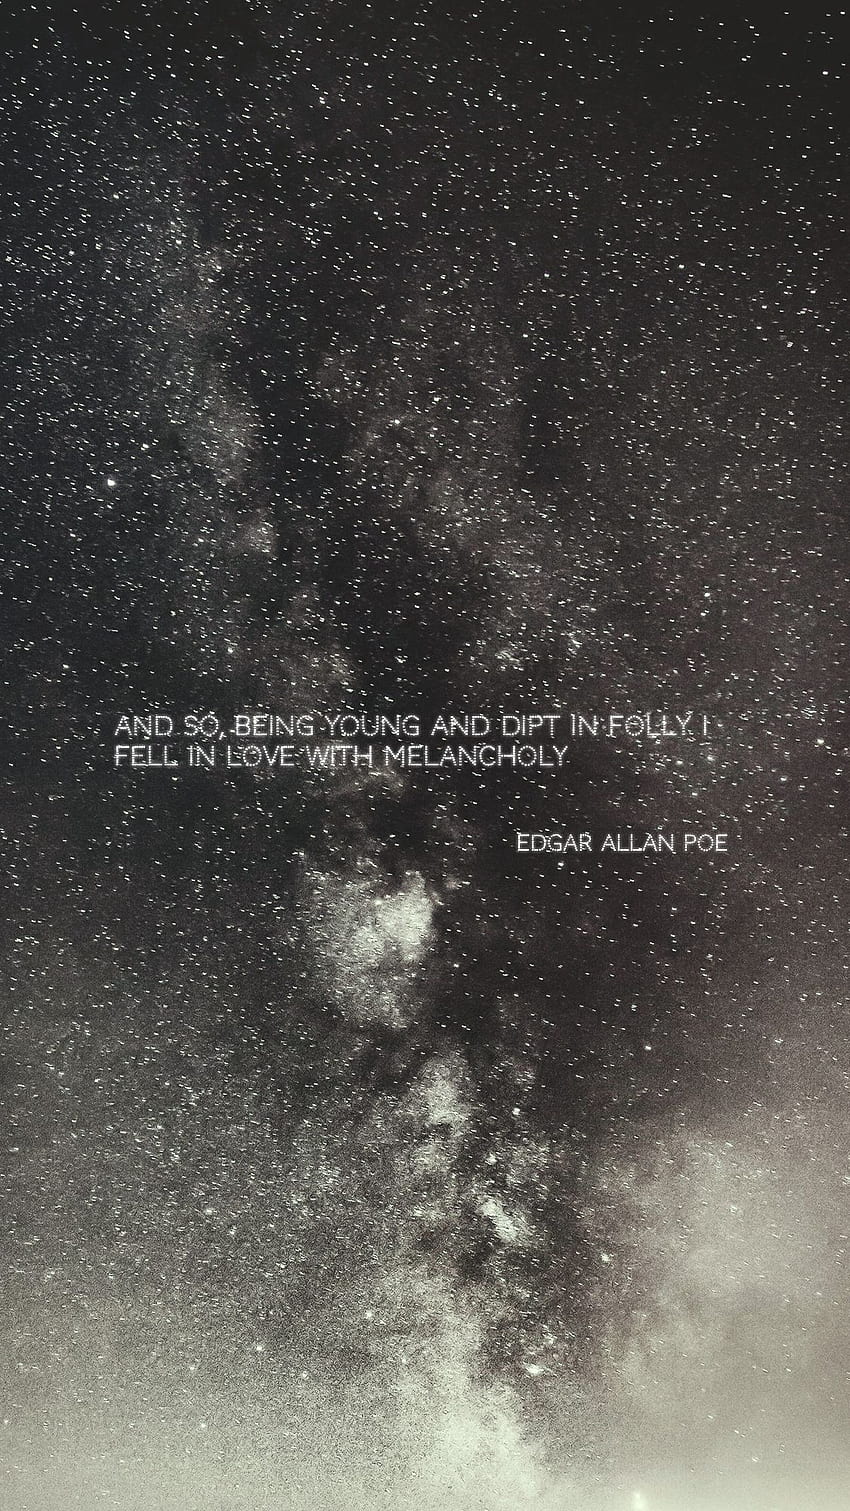 My Lockscreens - Stars. quotes, Poe quotes, Song lyric quotes ...